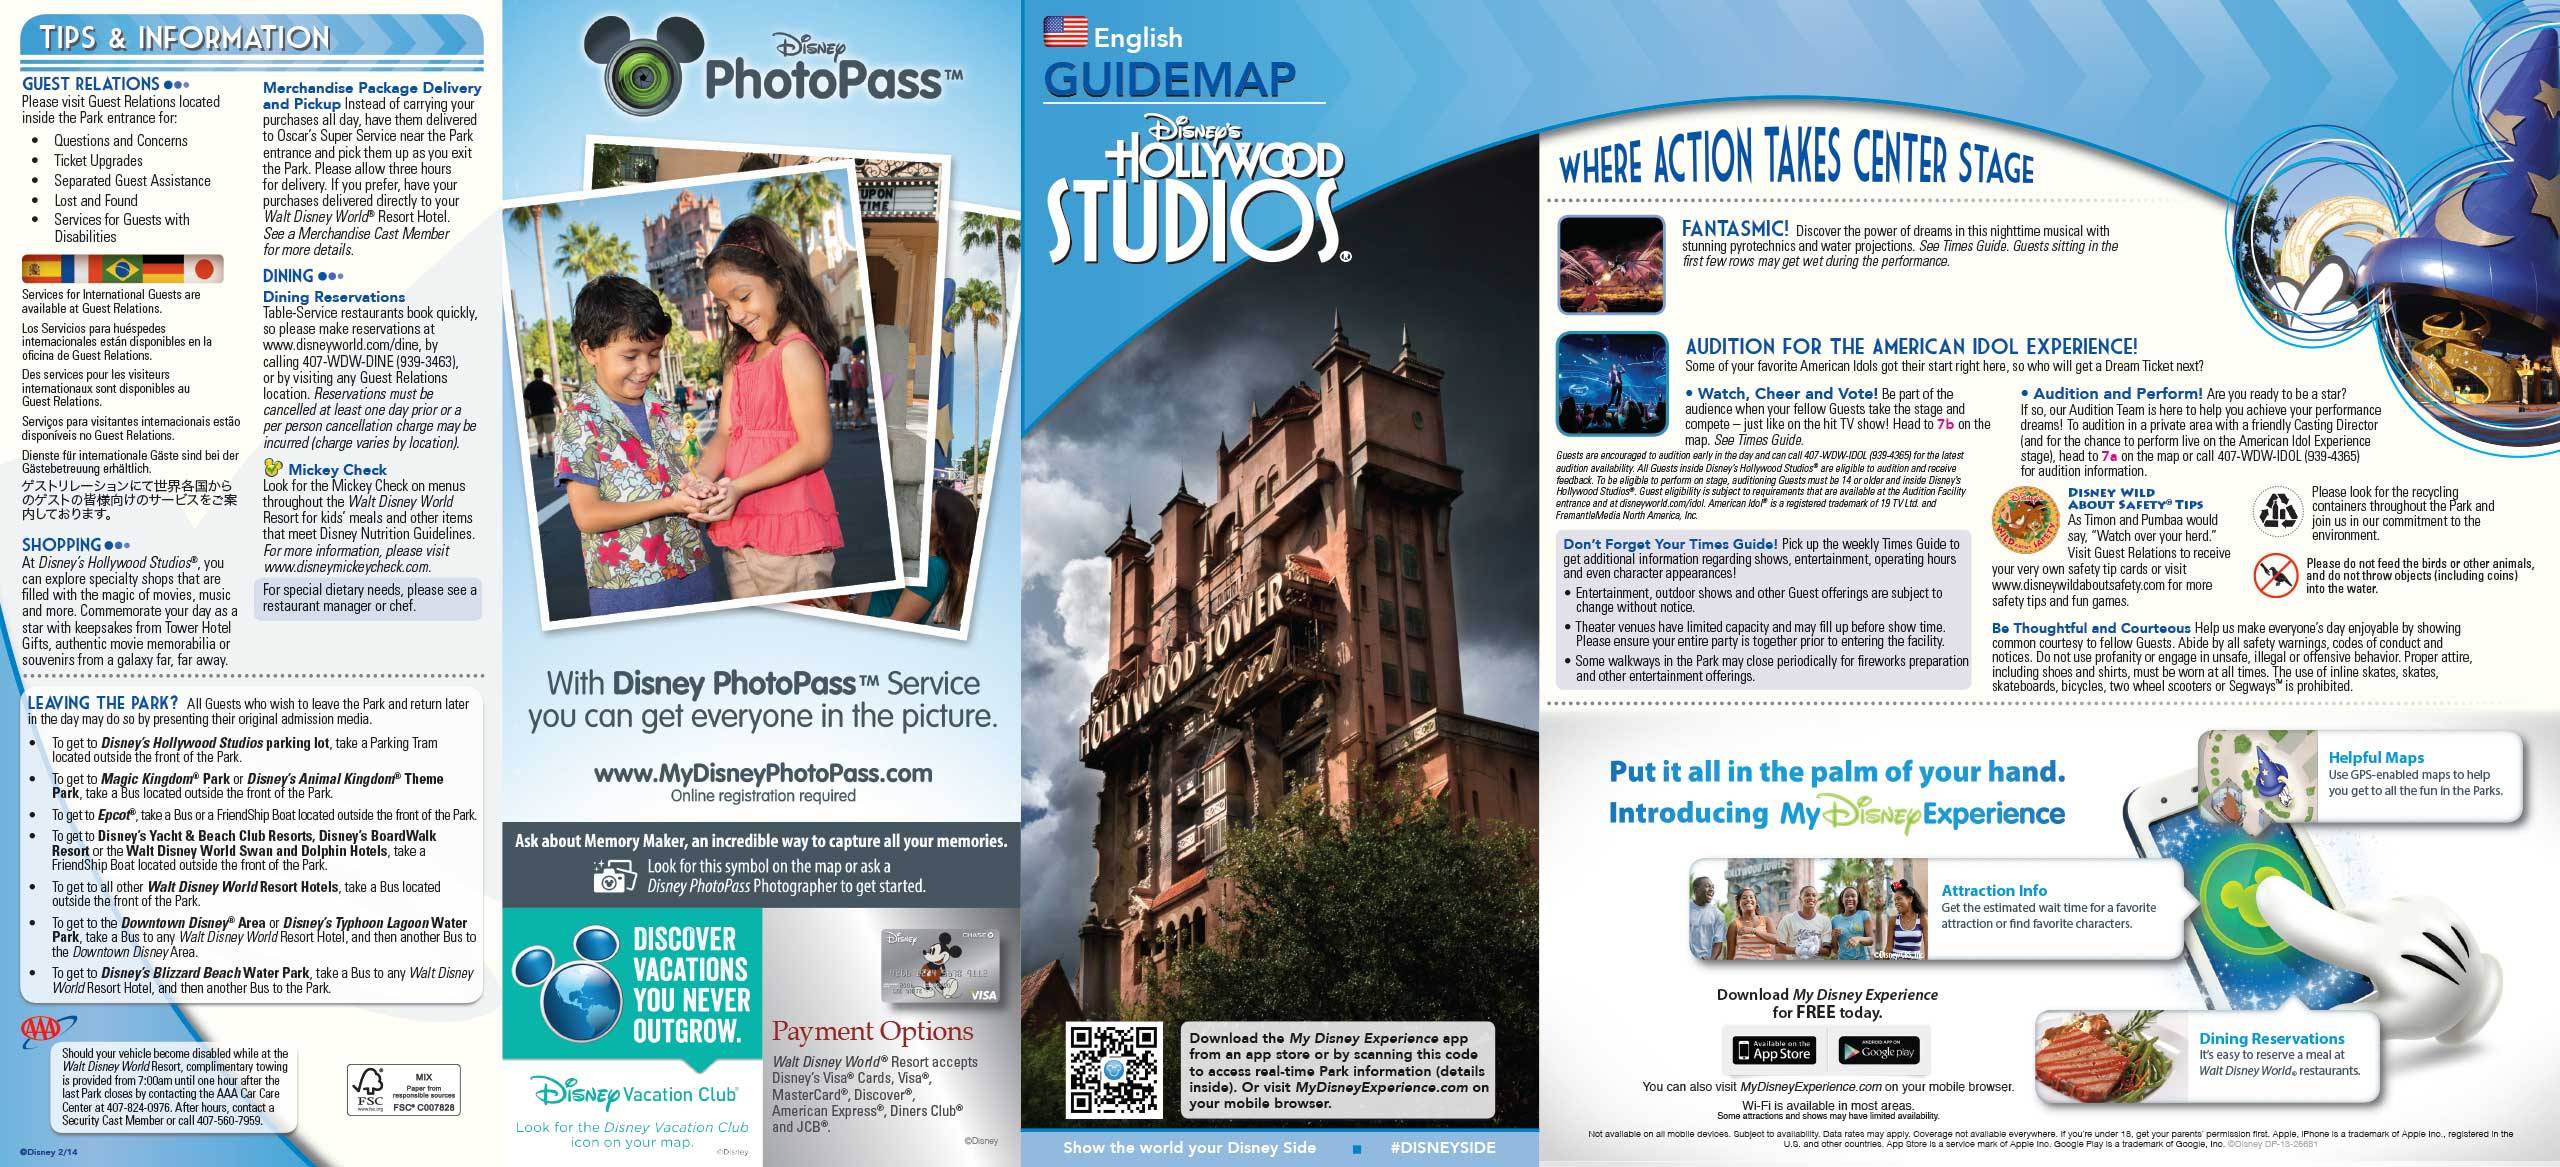 2014 Disney's Hollywood Studios guide map with FastPass+ details